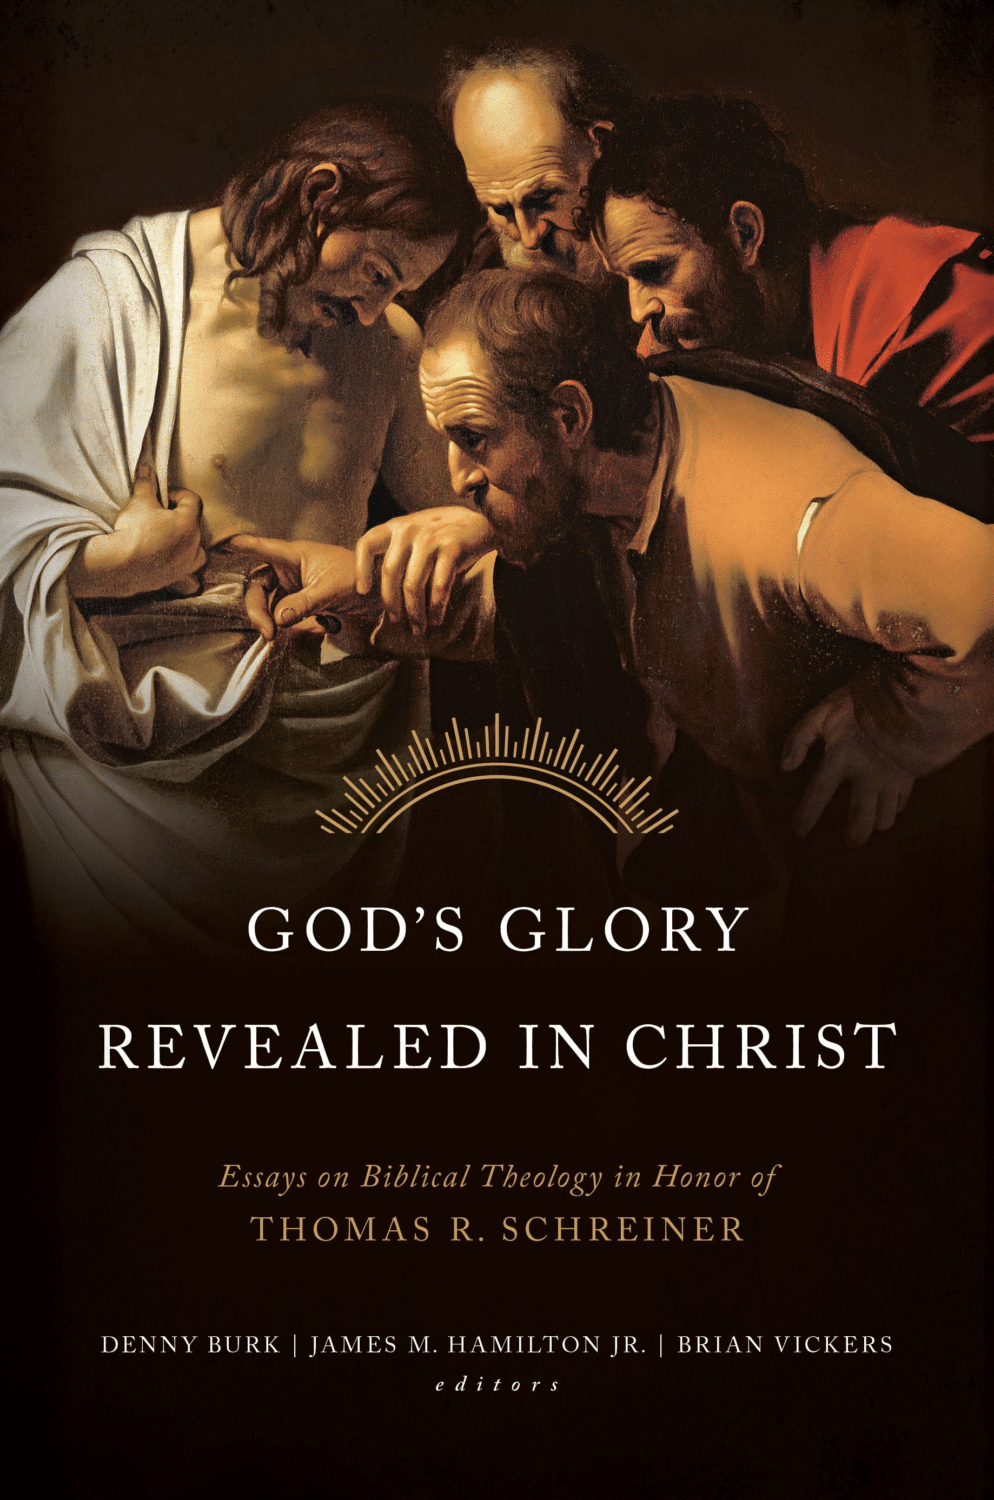 God’s Glory Revealed in Christ: Essays on Biblical Theology in Honor of Thomas R. Schreiner